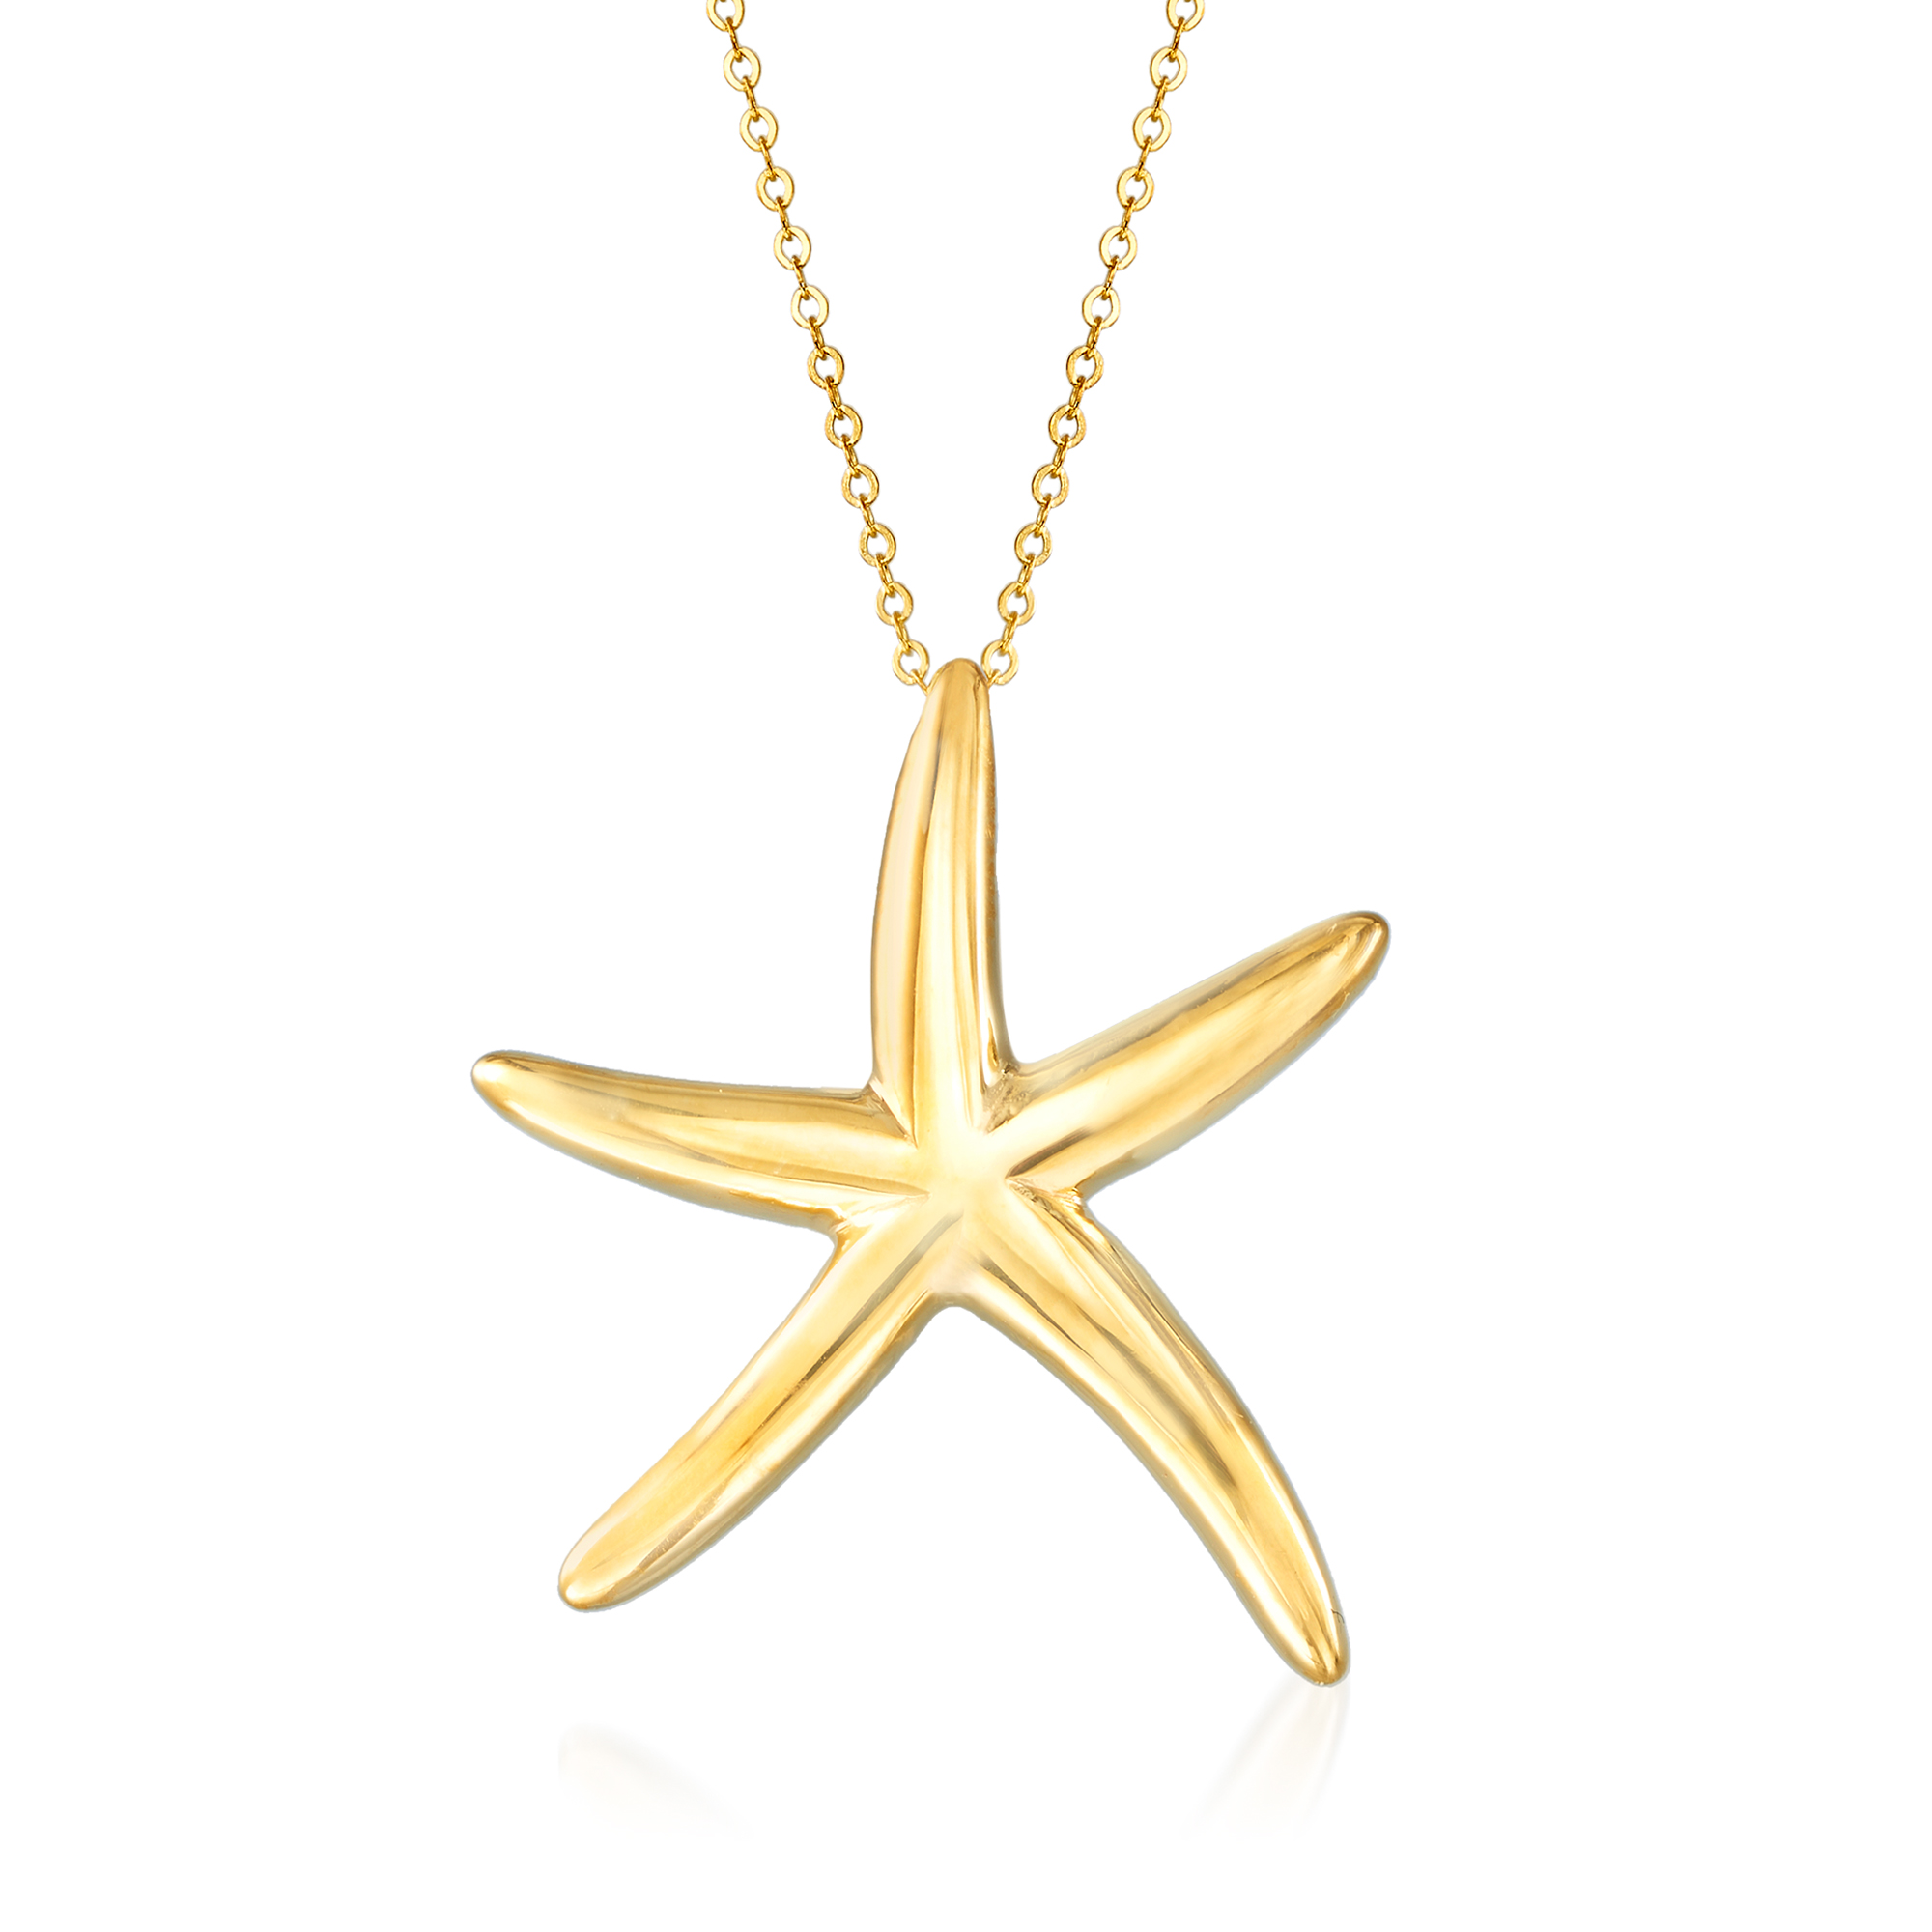 Details about   14K Yellow Gold Polished Open-Backed Starfish Pendant C2537 